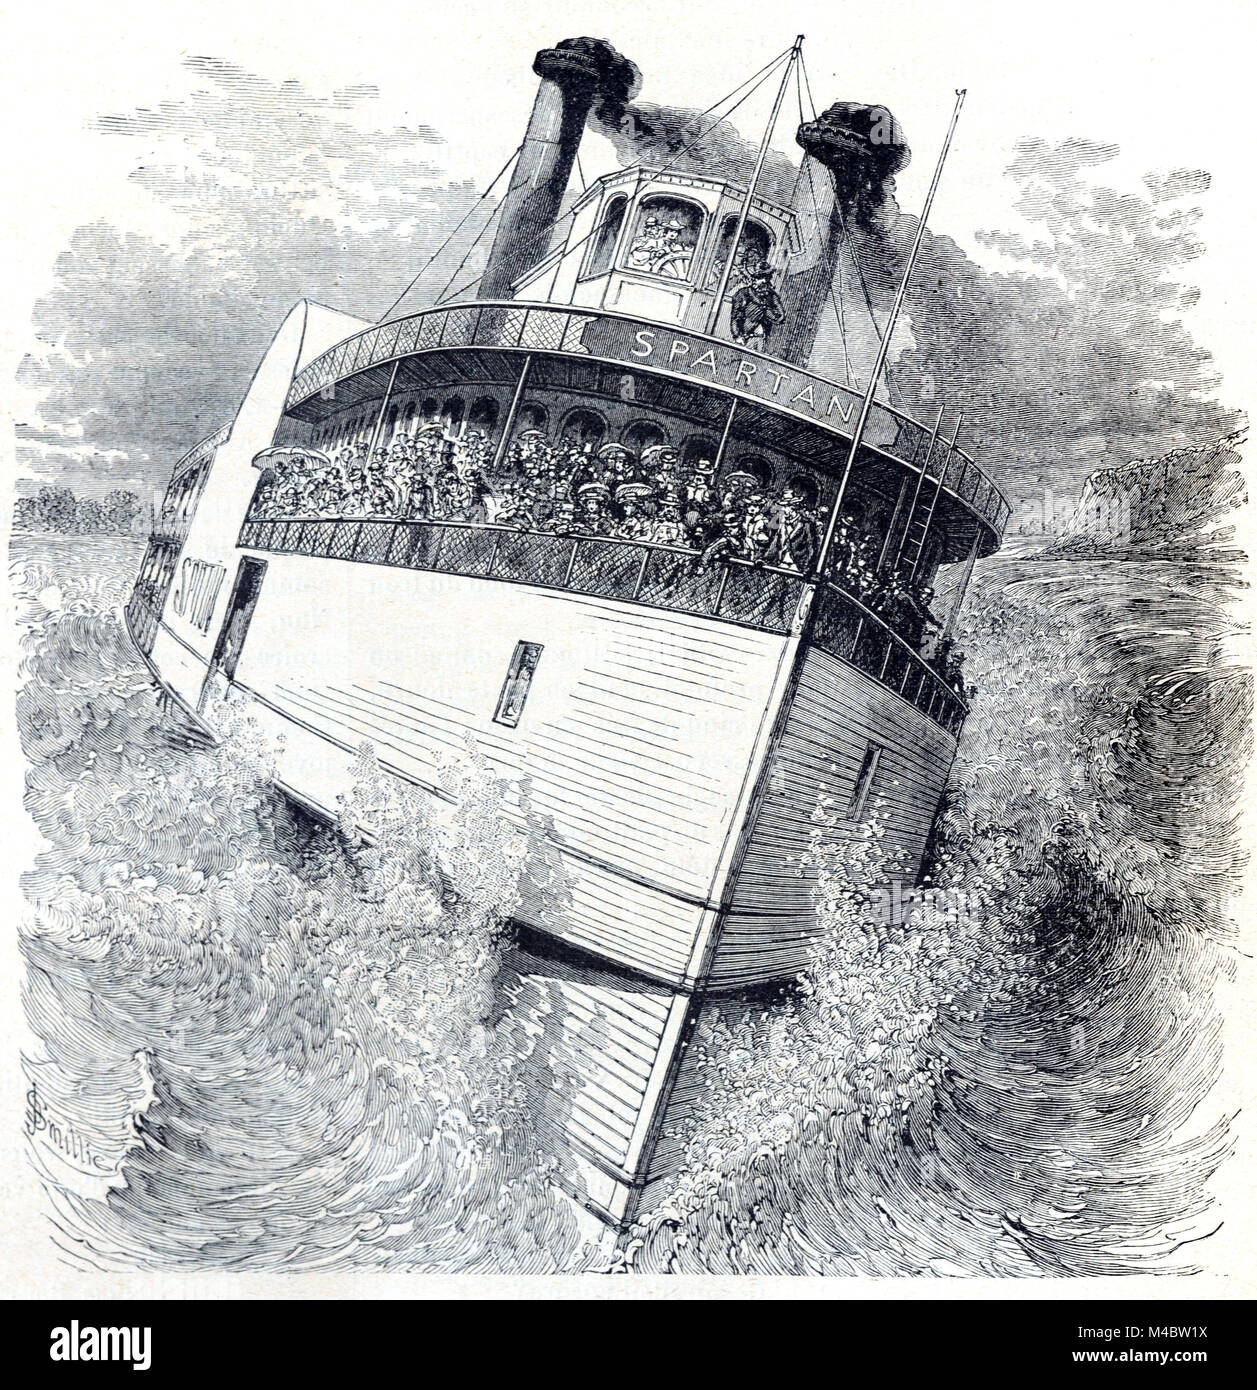 The Passenger Steamer or Steamboat 'Spartan' Navigating Rapids on the Niagara River between Canada and the United States. The Steamboat Cruised the Great Lakes and the Niagara River. (Engraving, 1880) Stock Photo